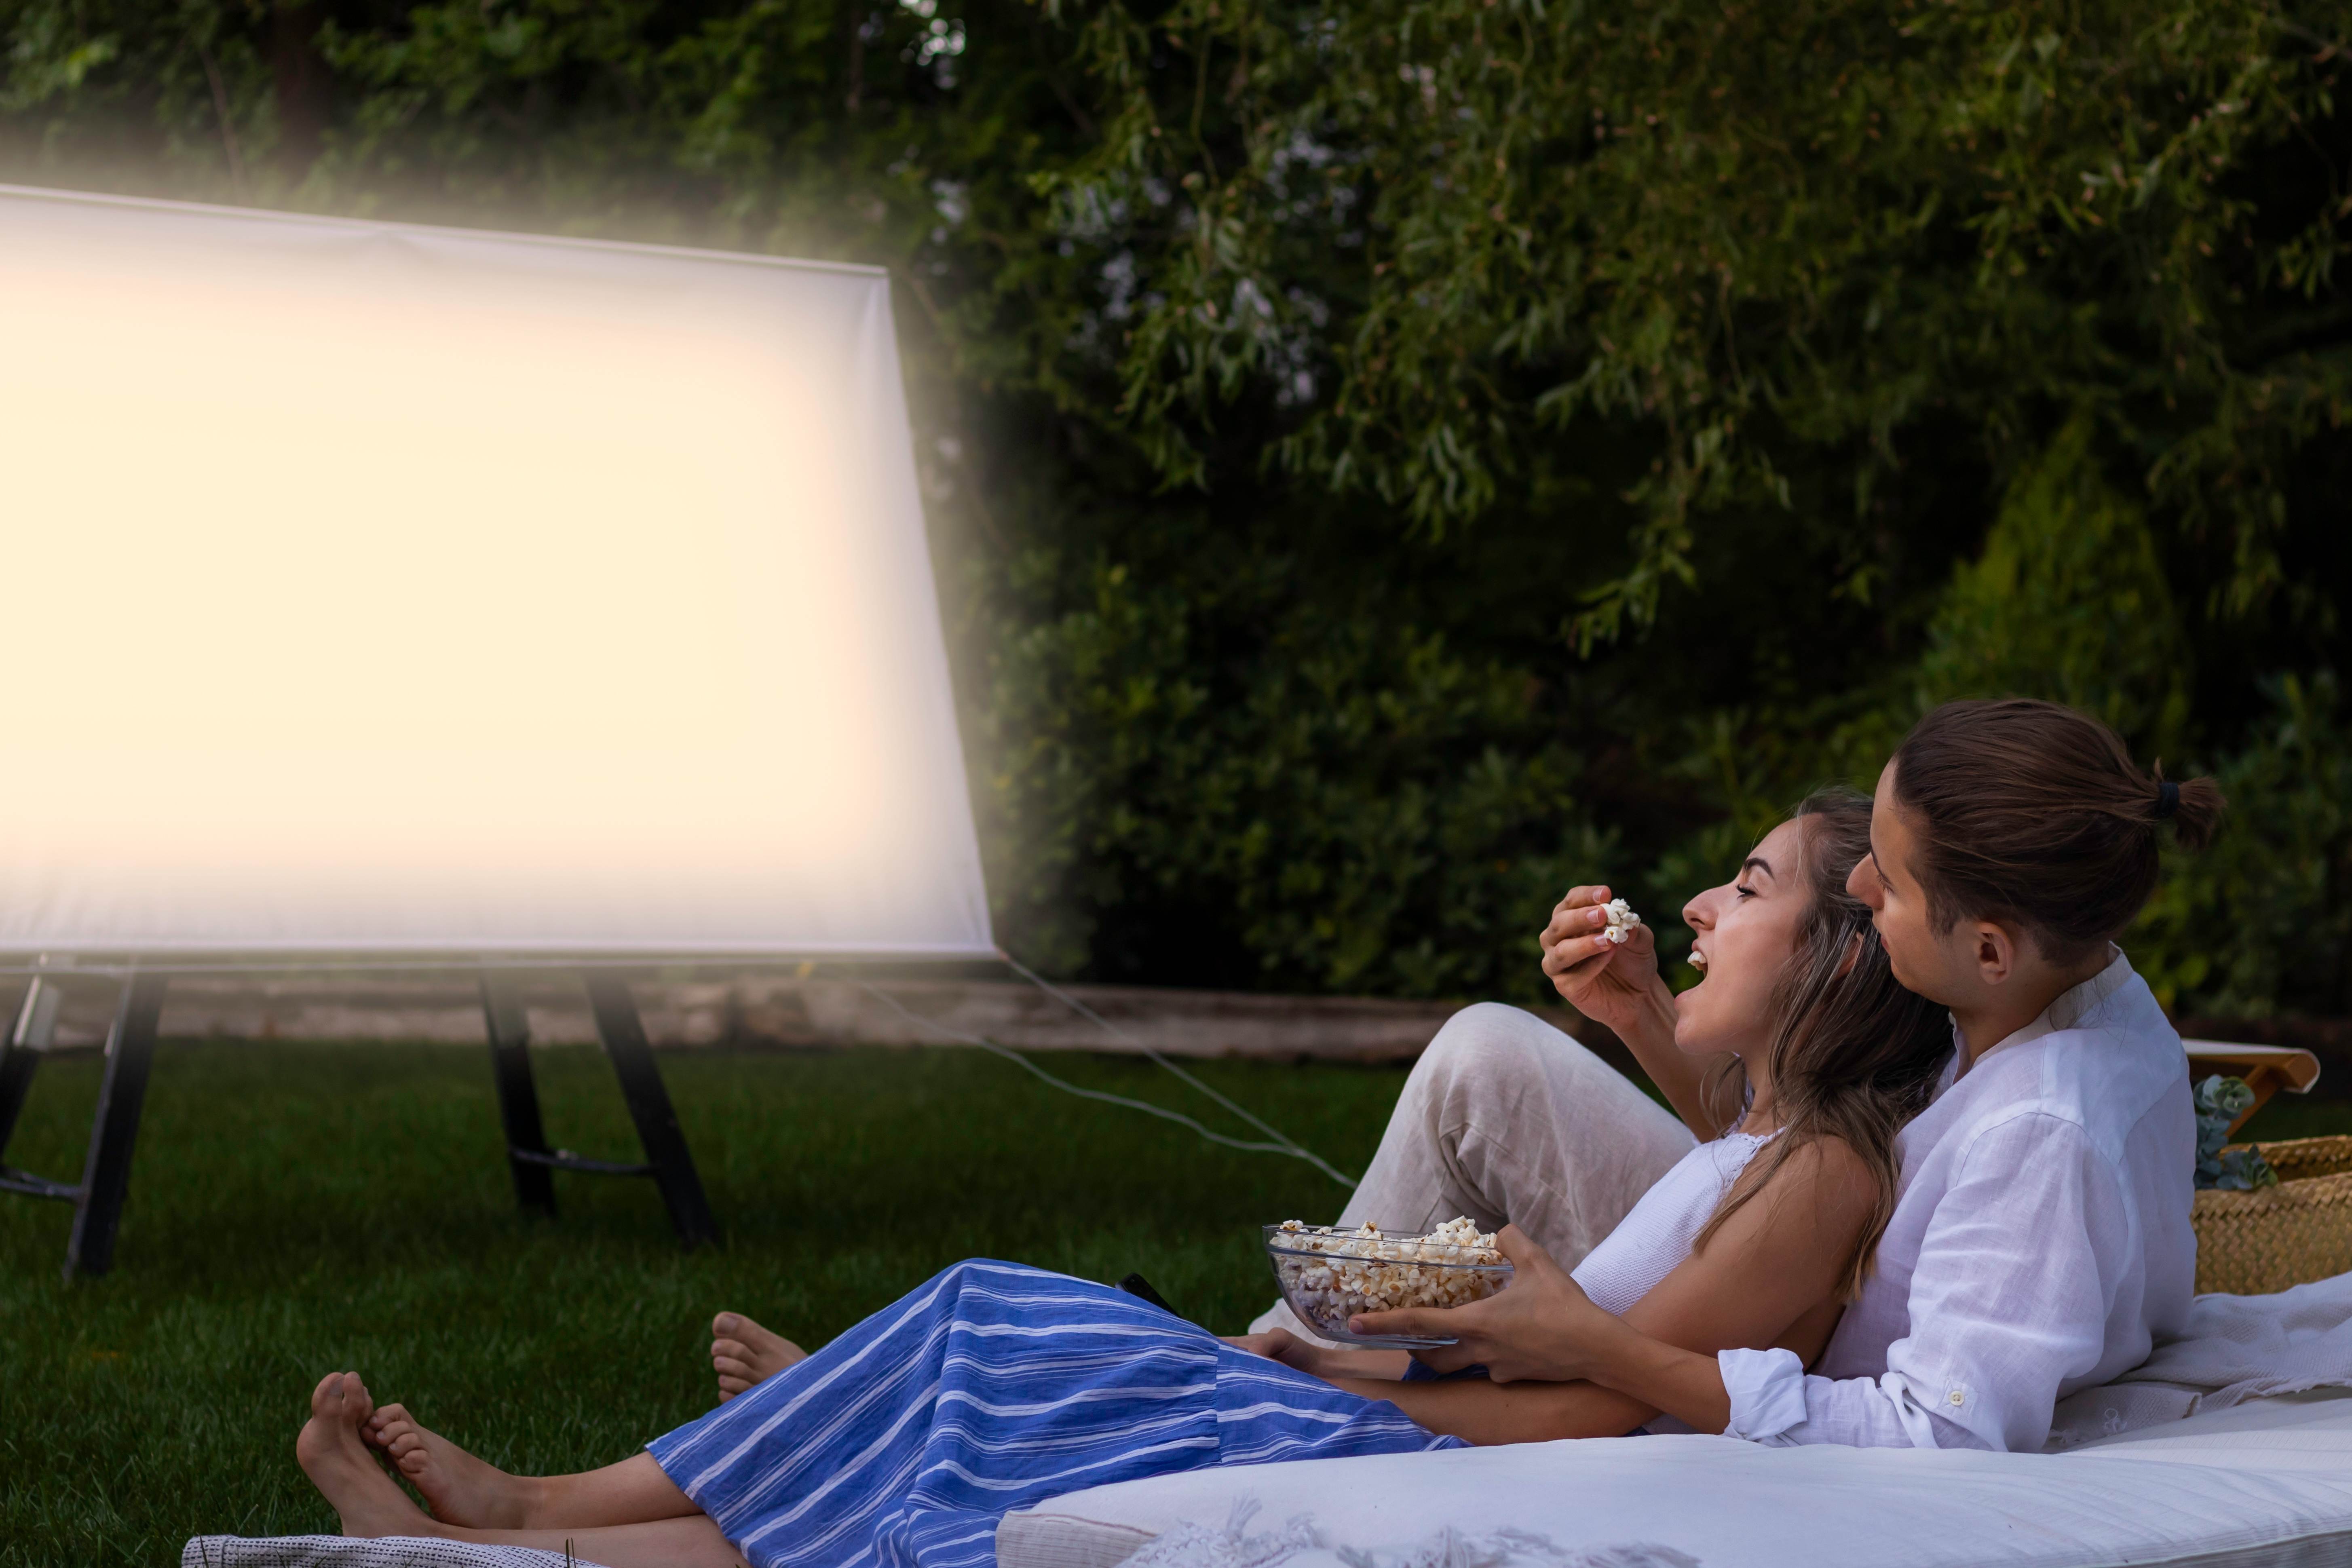 A loving couple watches an outdoor movie together on a summer night